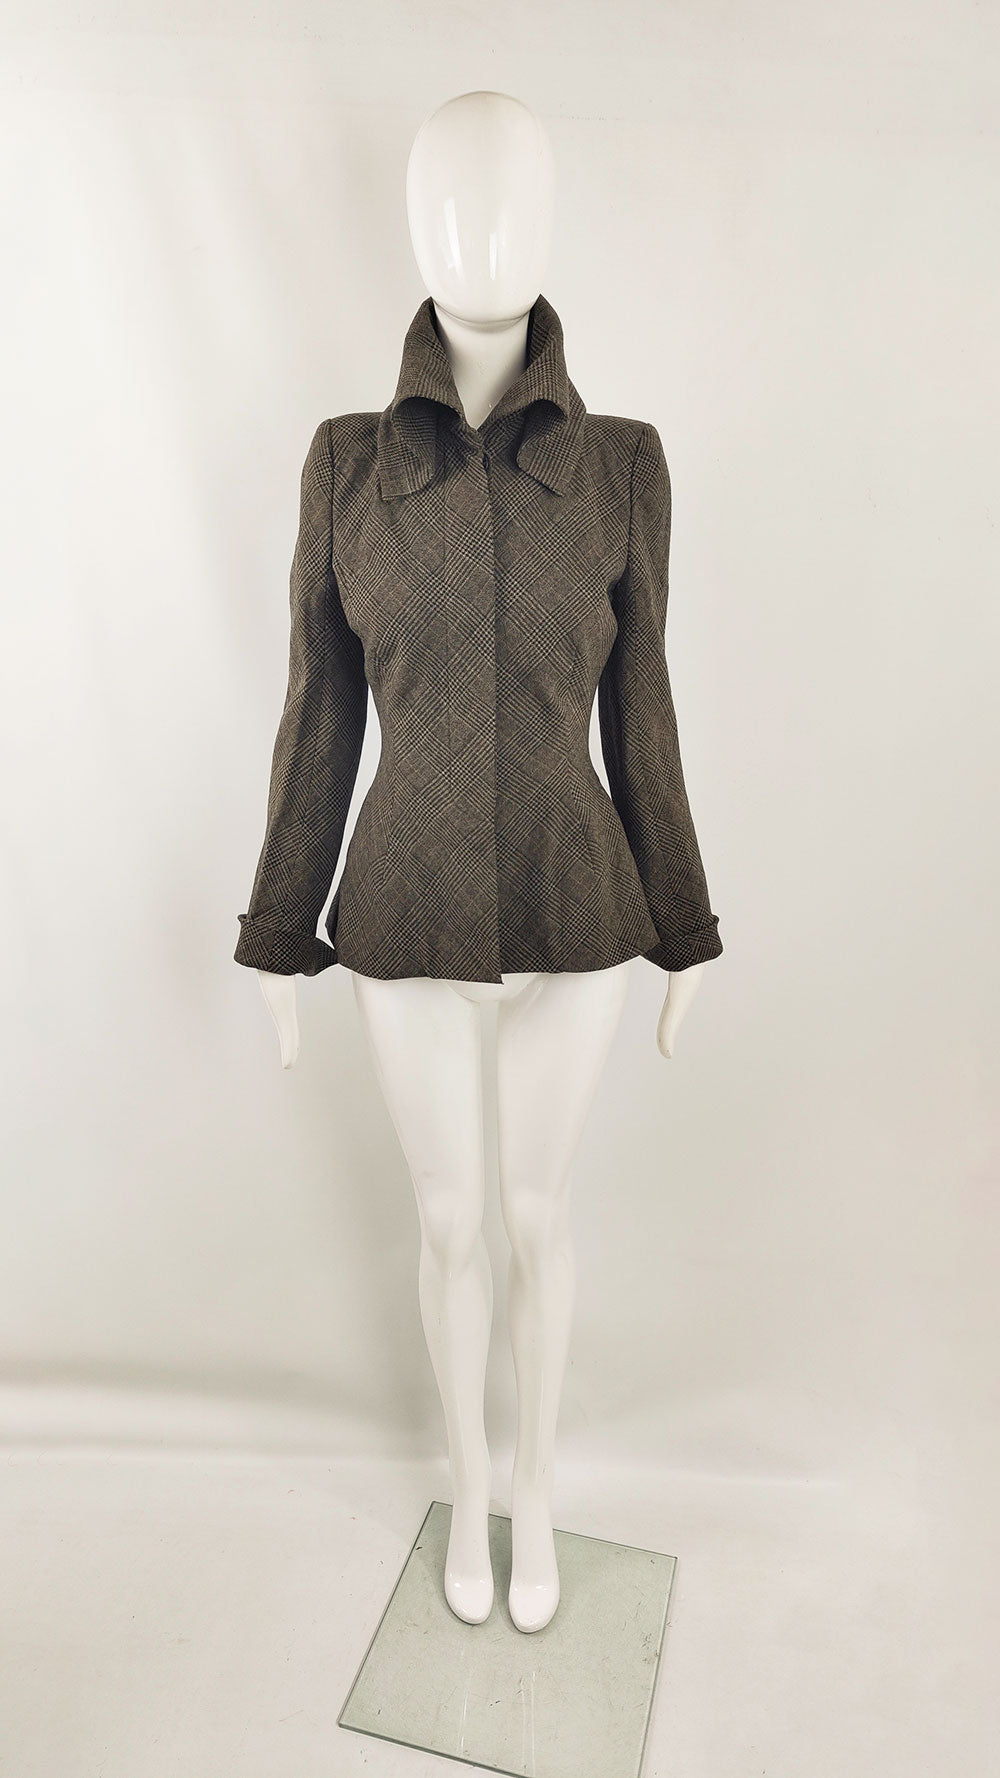 An image of a mannequin wearing a vintage tweed jacket for women by Parisian designer, Mariot Chanet.